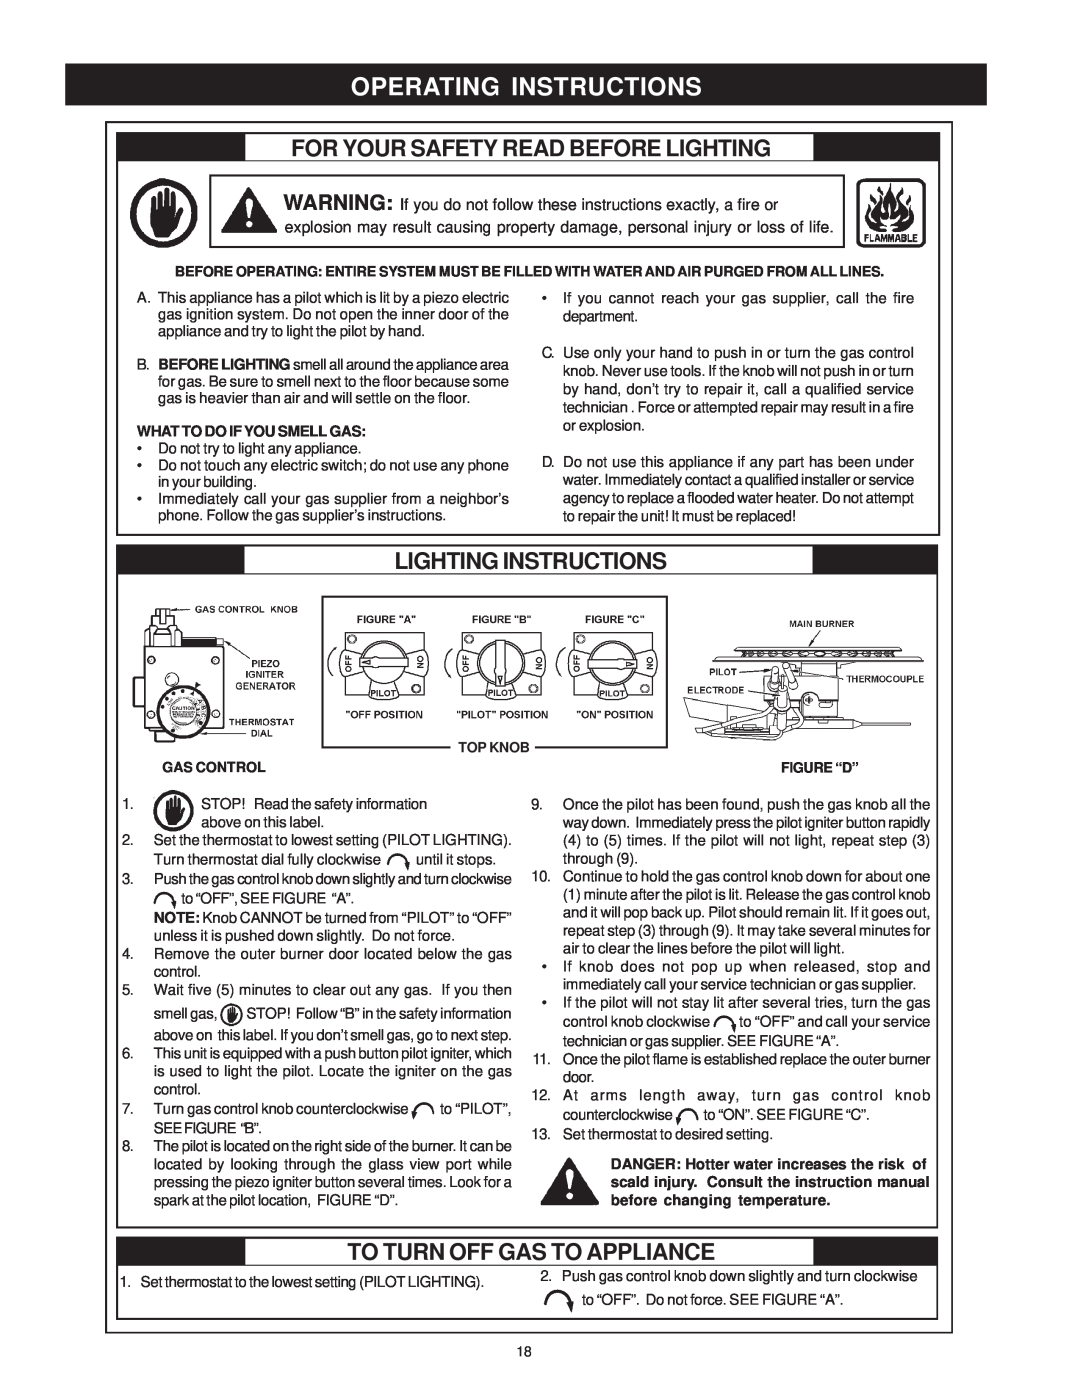 Sears 153.336466 40 GALLON Operating Instructions, For Your Safety Read Before Lighting, Lighting Instructions, Top Knob 